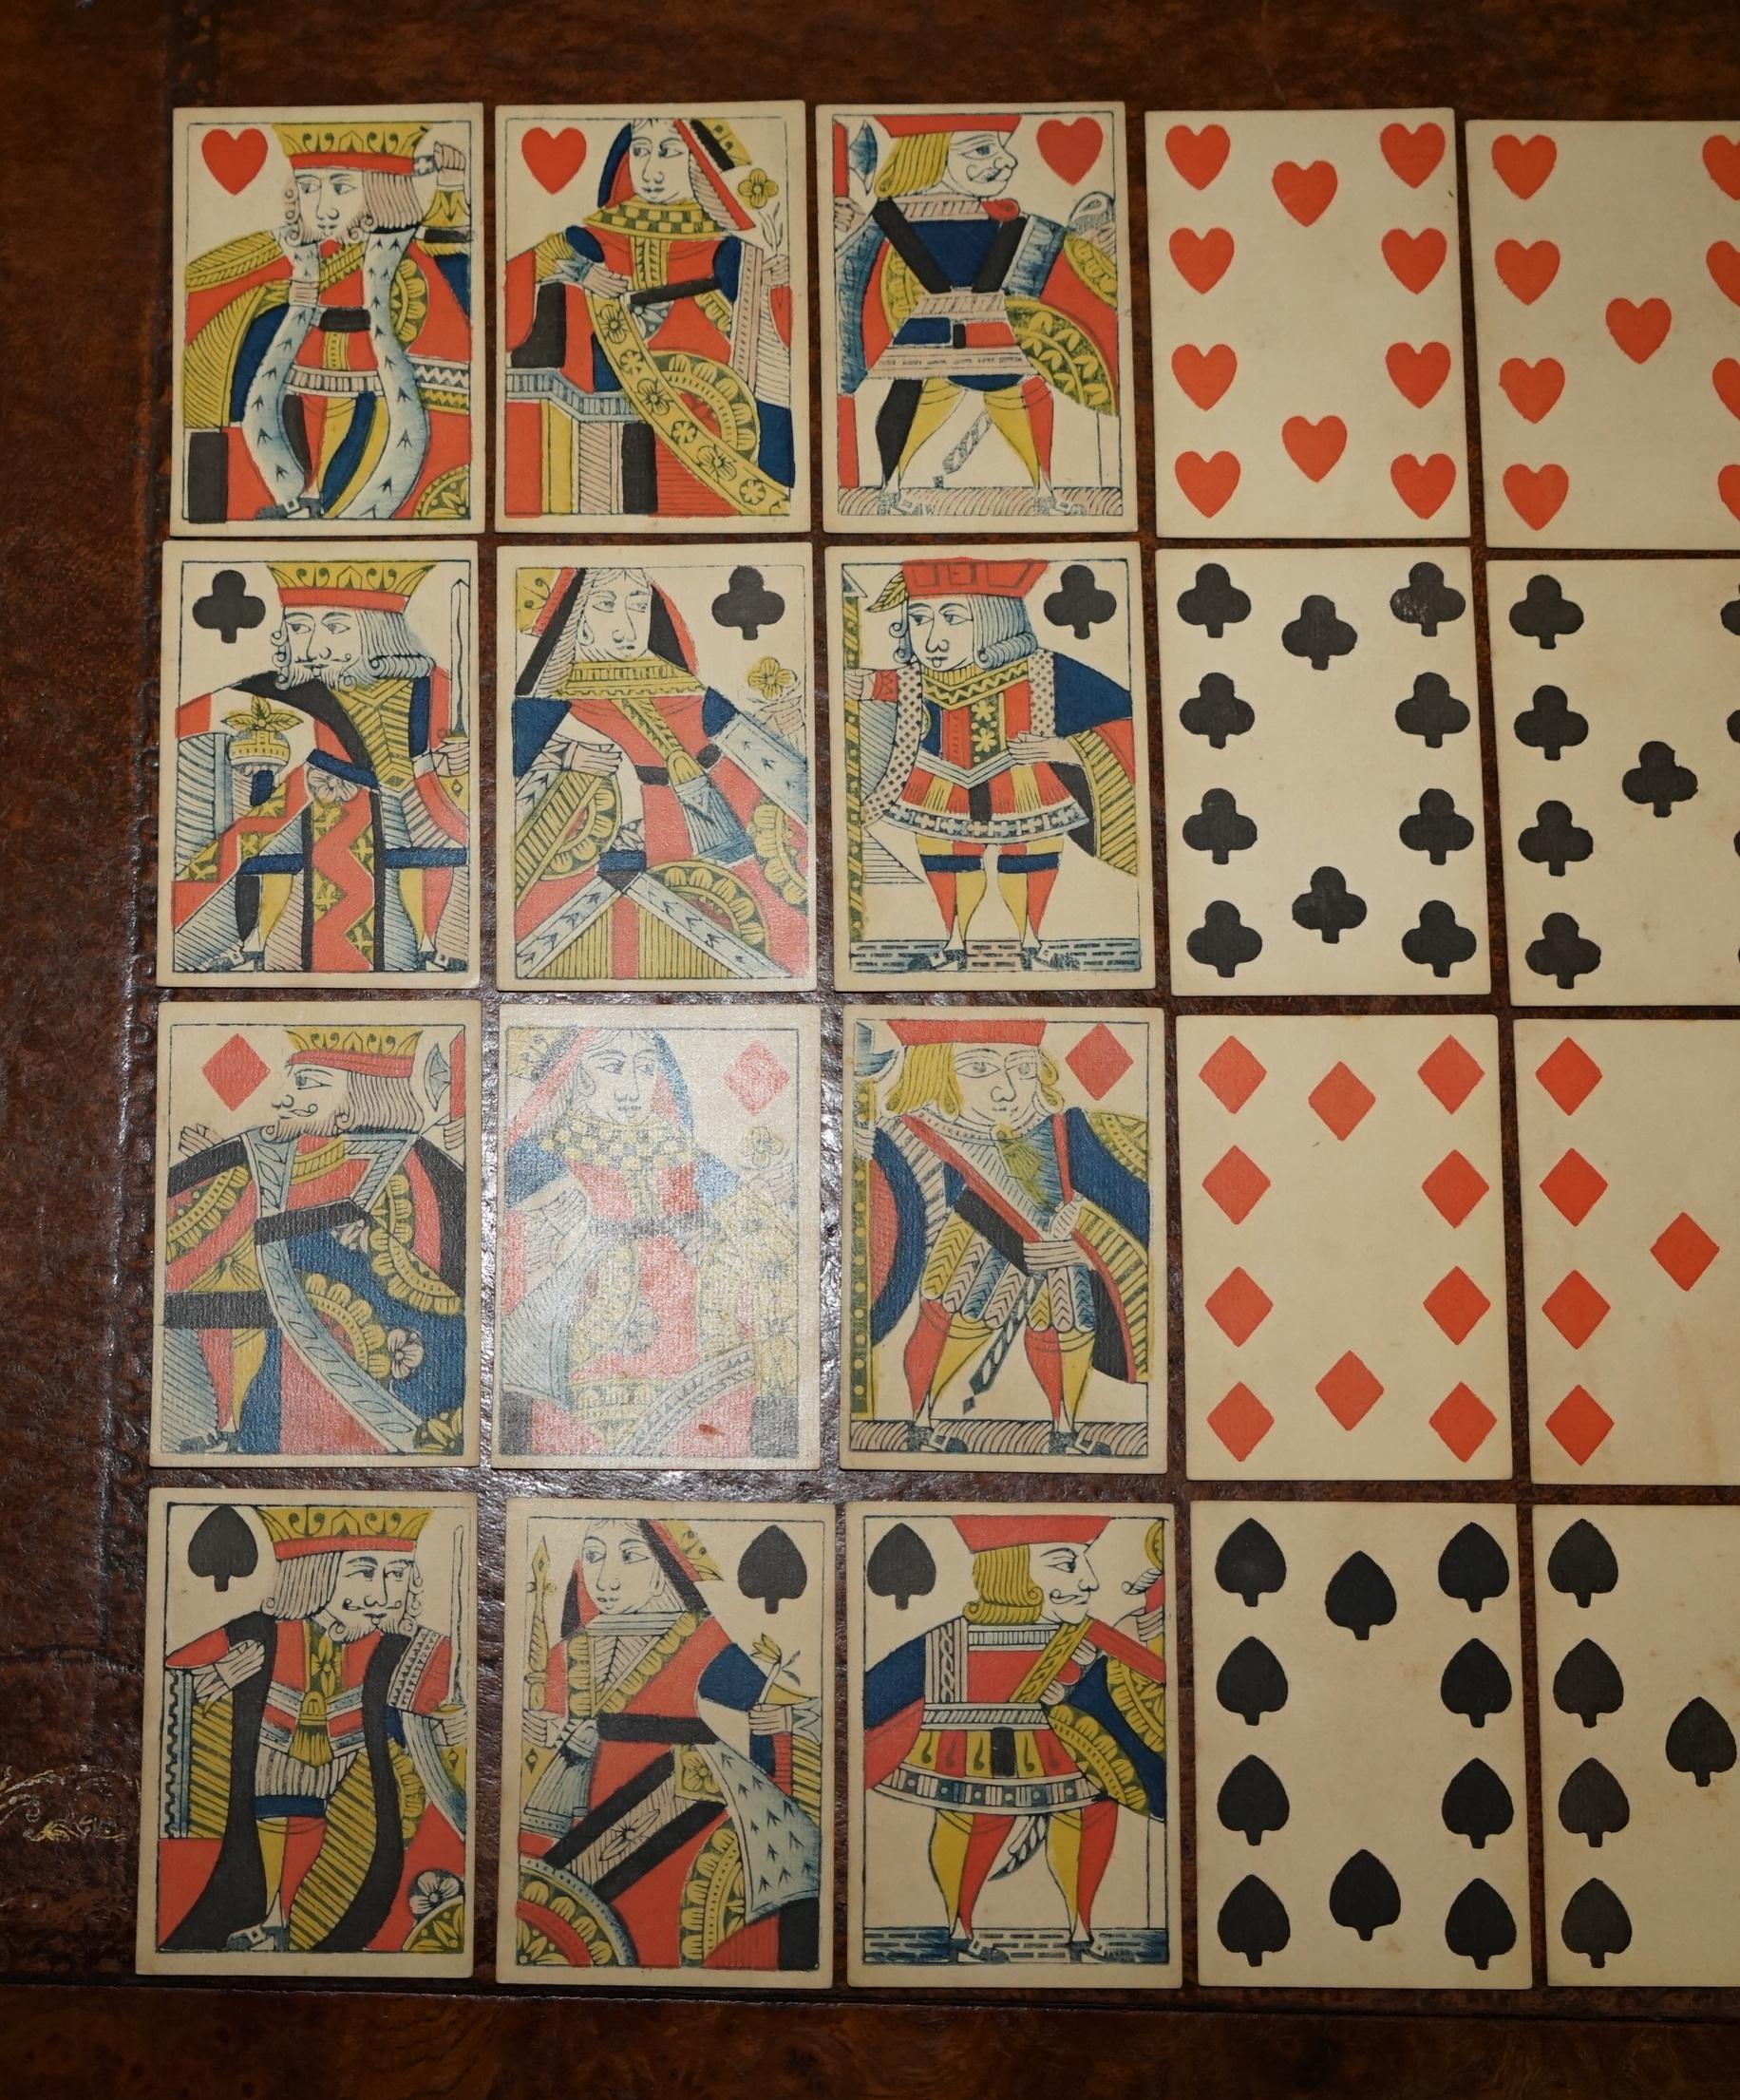 William IV ANTIQUE 1830 THOMAS CRESWICK GEORGIAN PLAYiNG CARDS WITH FIZZLE ACE OF SPADES For Sale